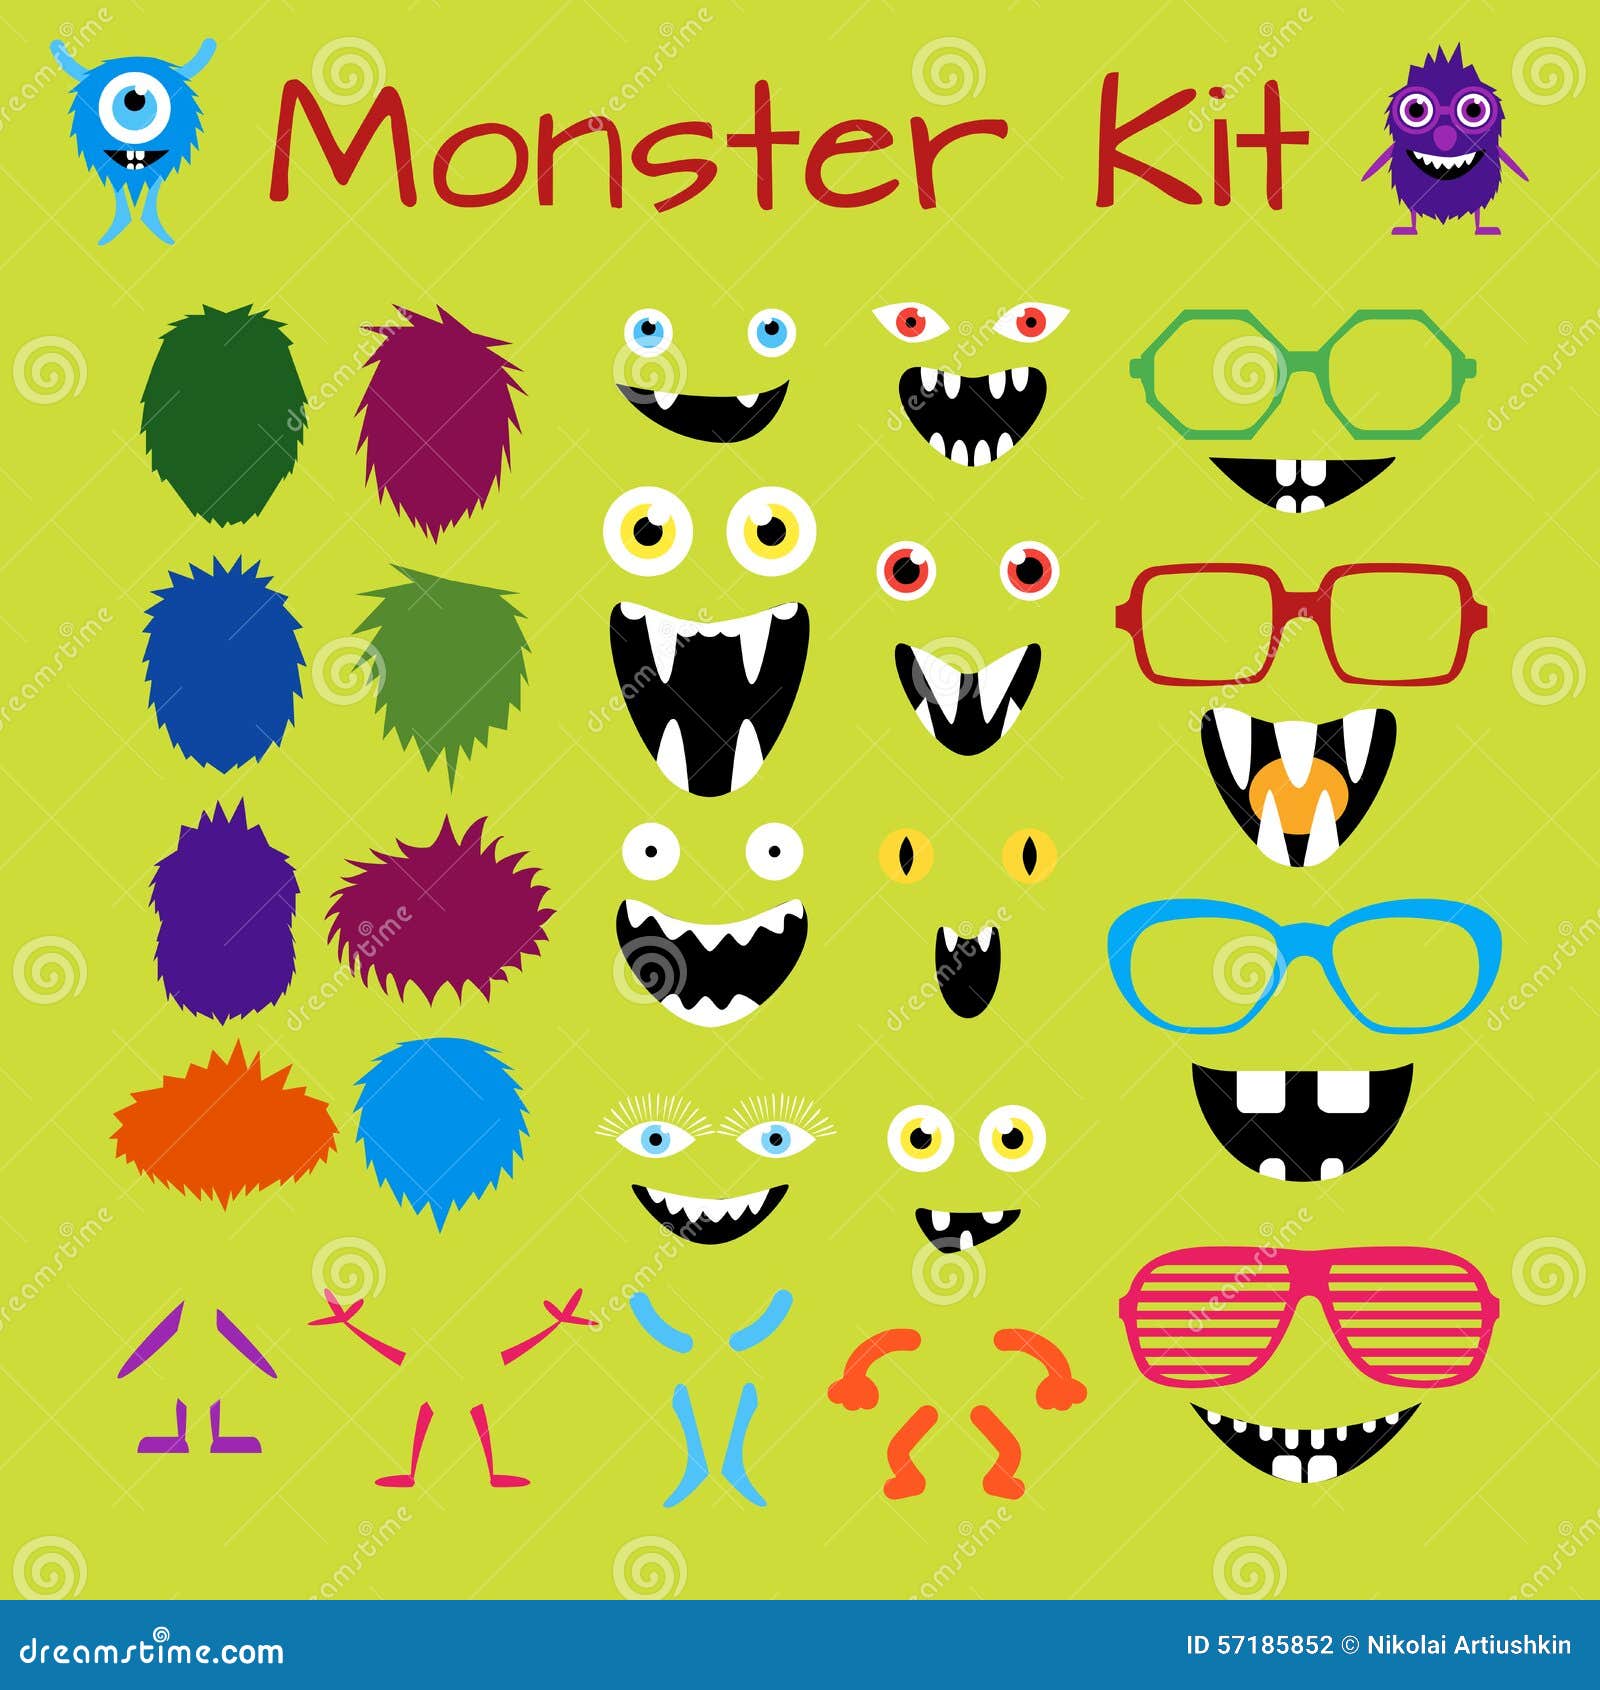 monster and character creation kit